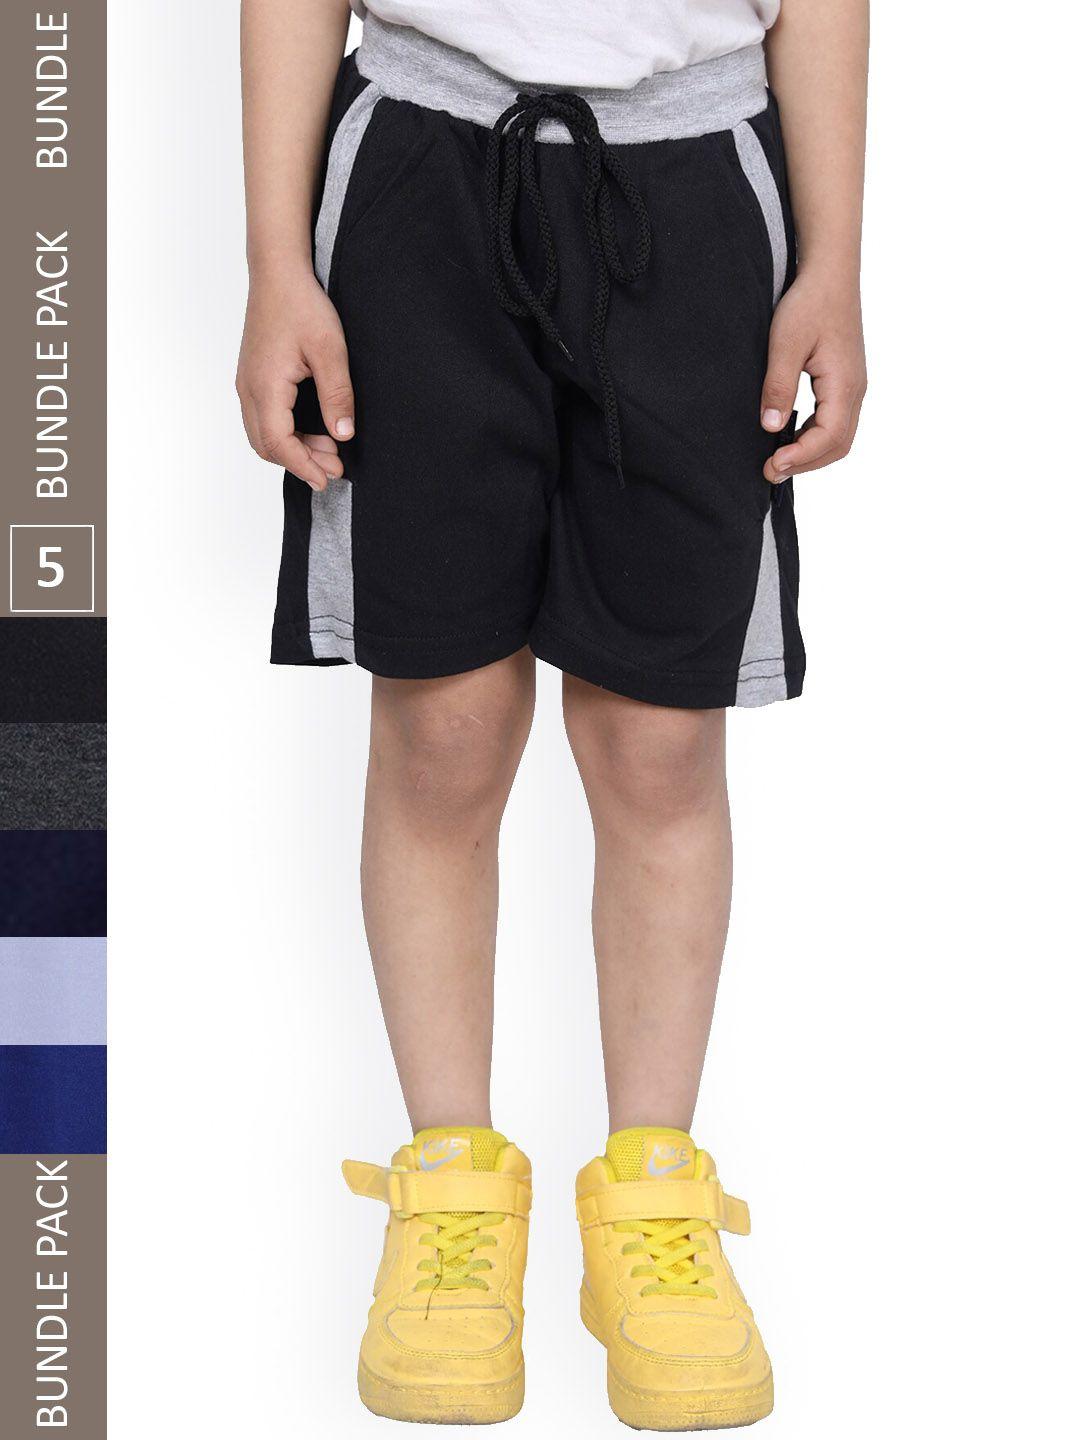 indiweaves-boys-pack-of-5-high-rise-cotton-shorts